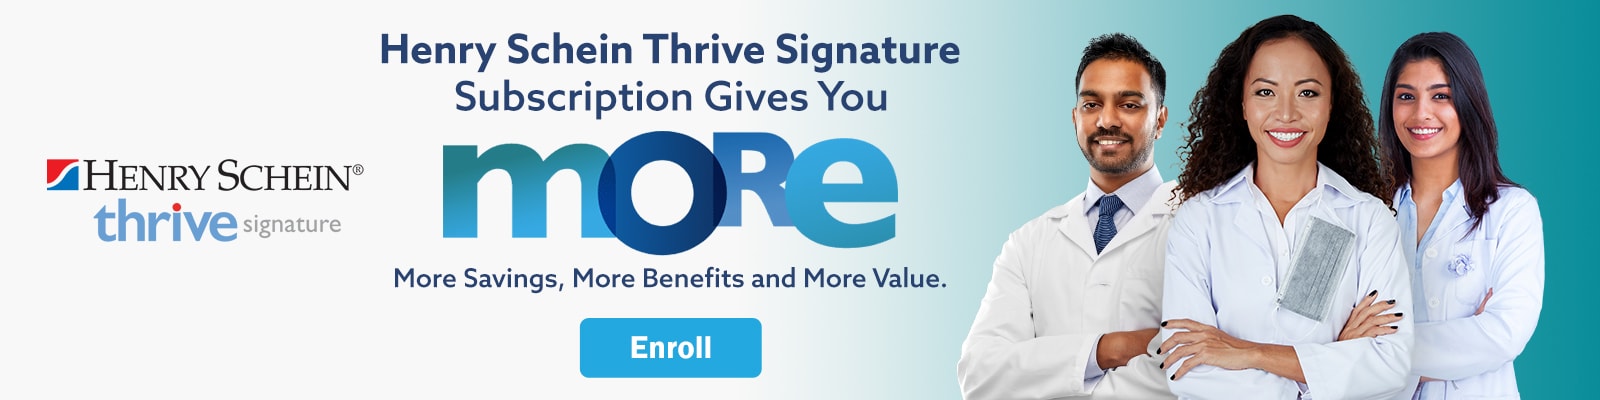 Henry Schein Thrive Signature Subscription Gives You MORE